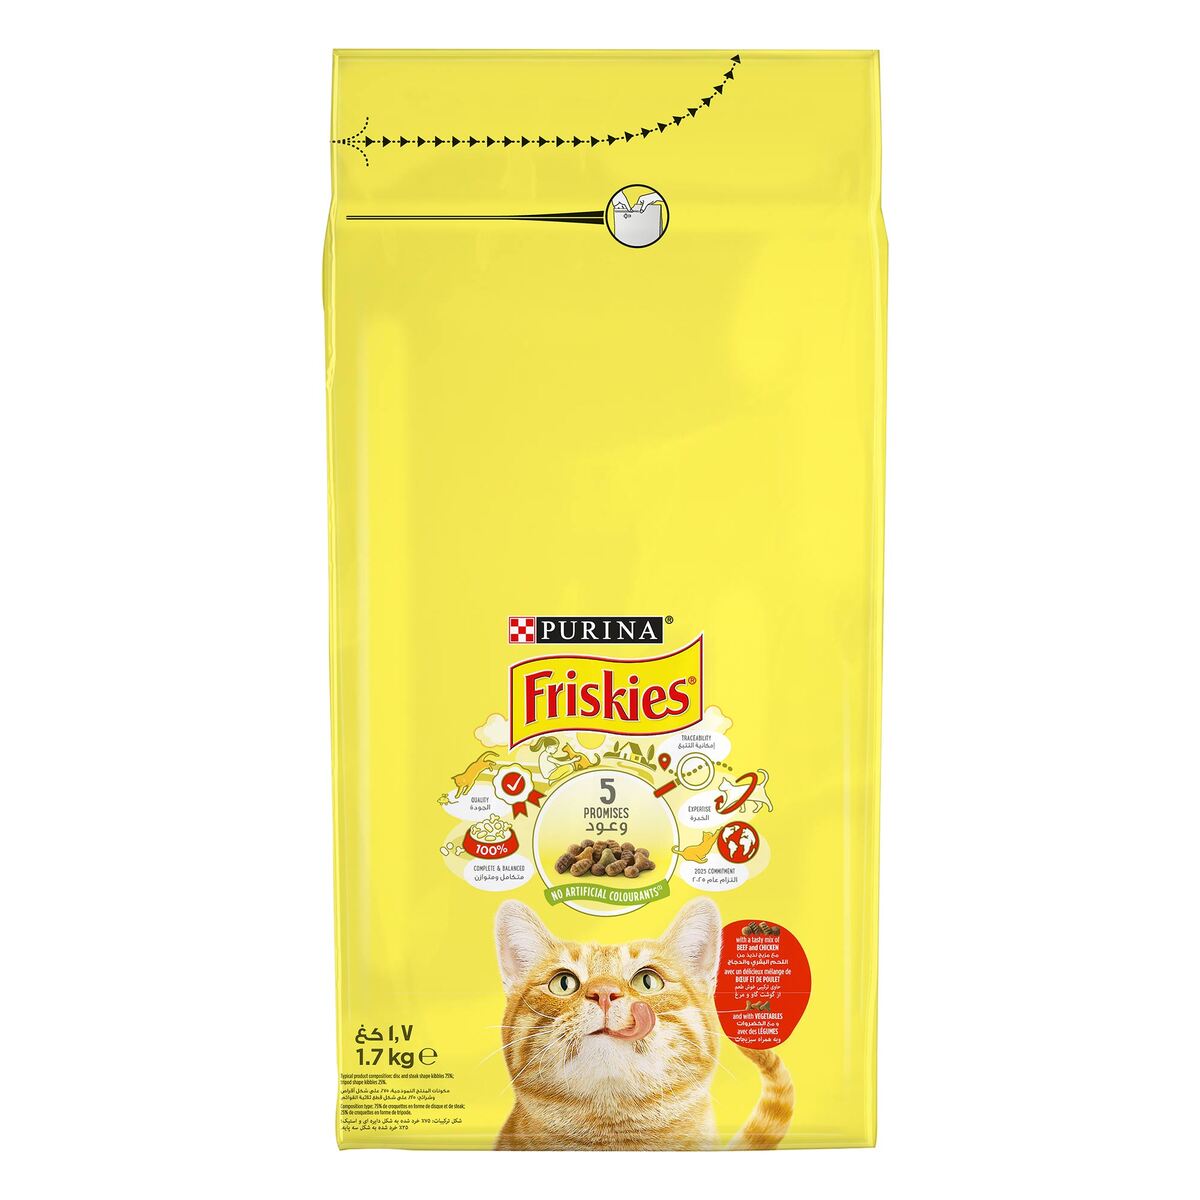 Purina Friskies Cat Food With Beef, Chicken & Vegetables 1.7 kg